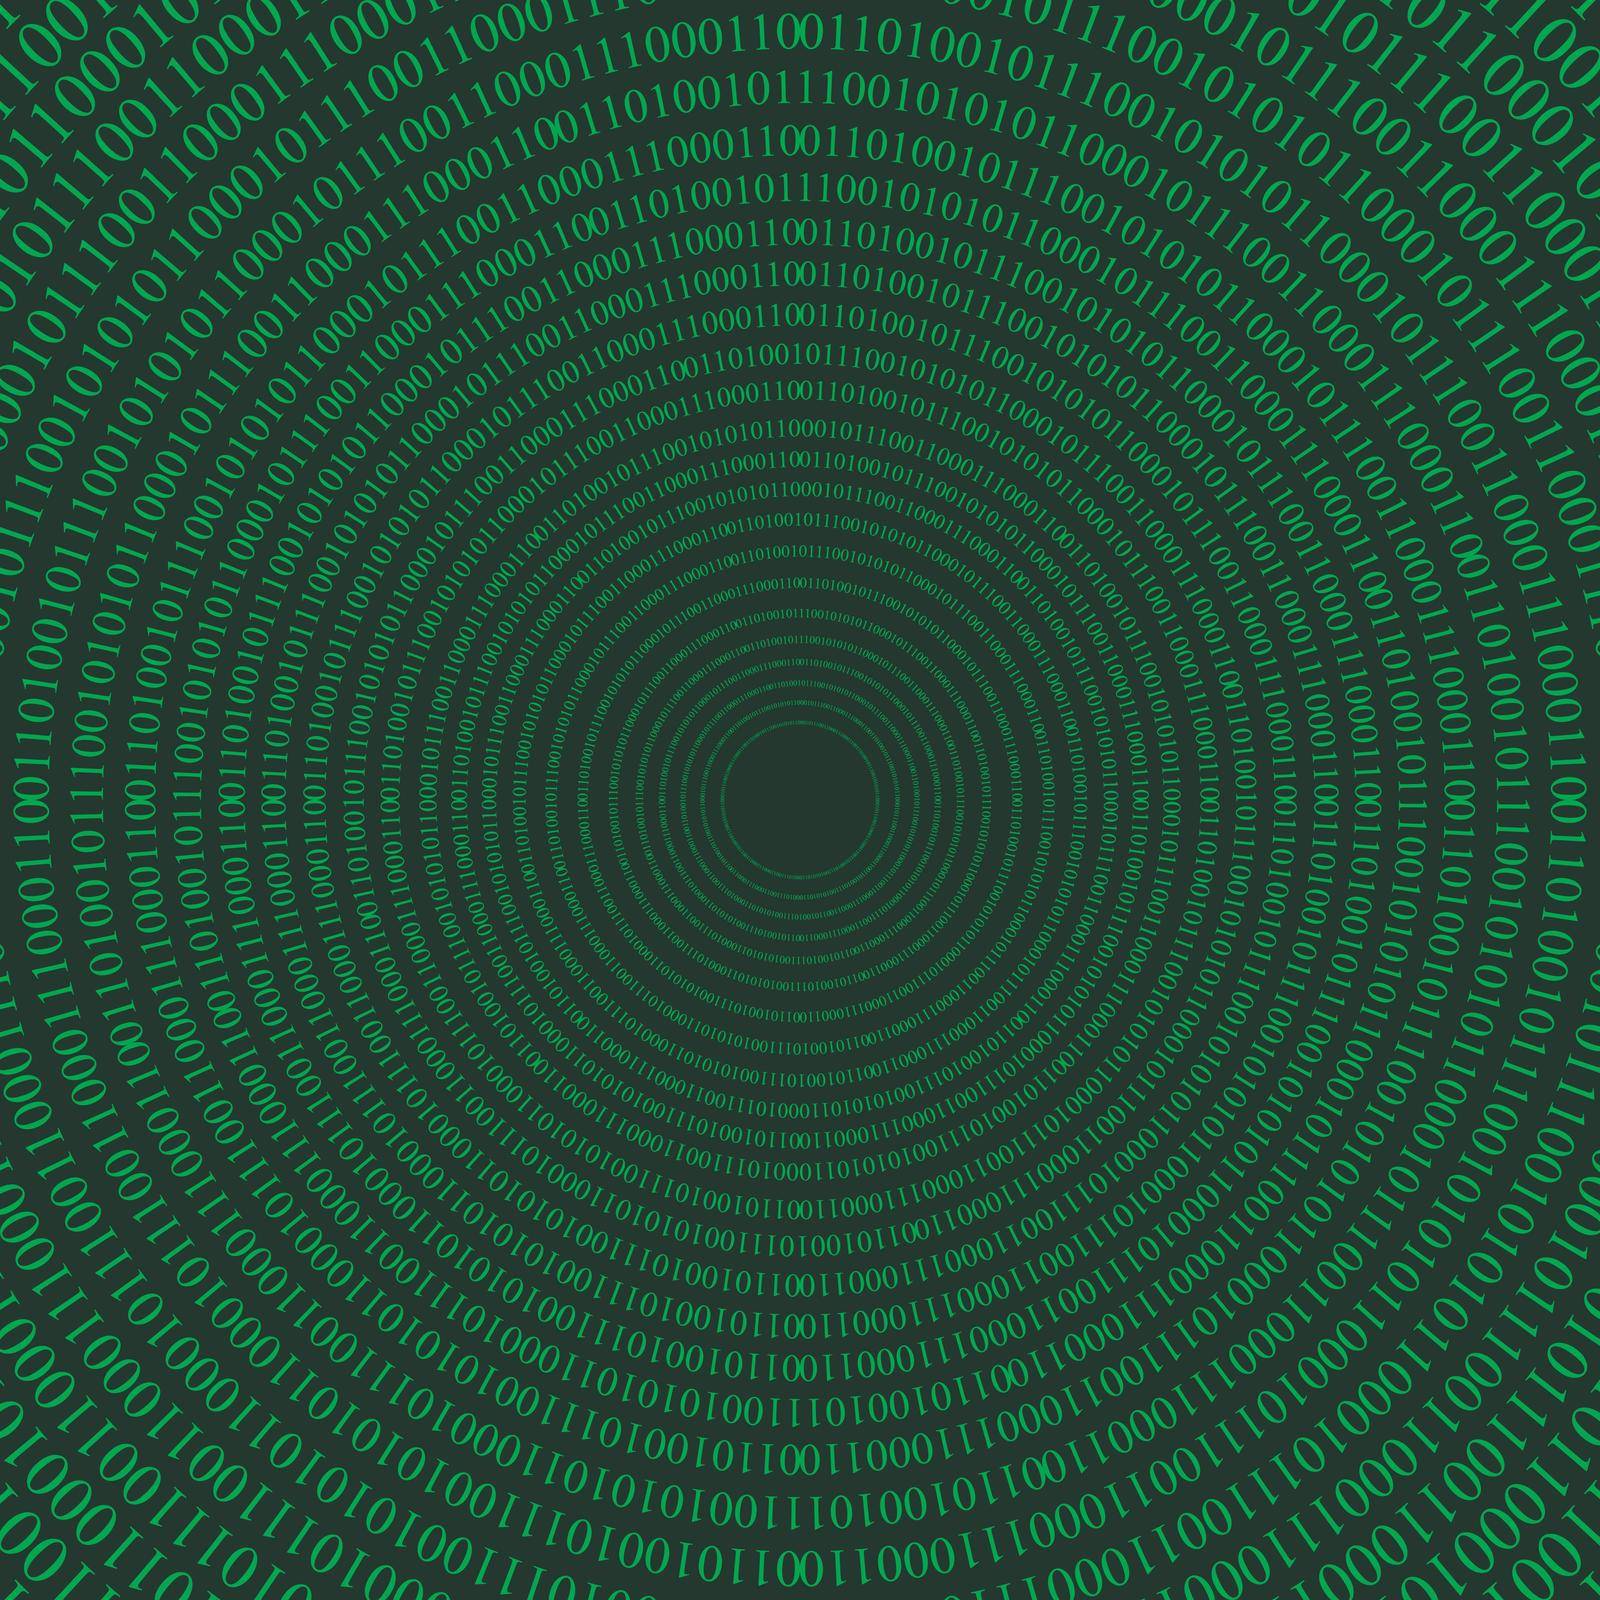 Abstract Technology Background. Web Developer. Computer Code. Programming. Coding. Hacker concept. Vector Illustration.matrix circular pattern effect of the tunnel